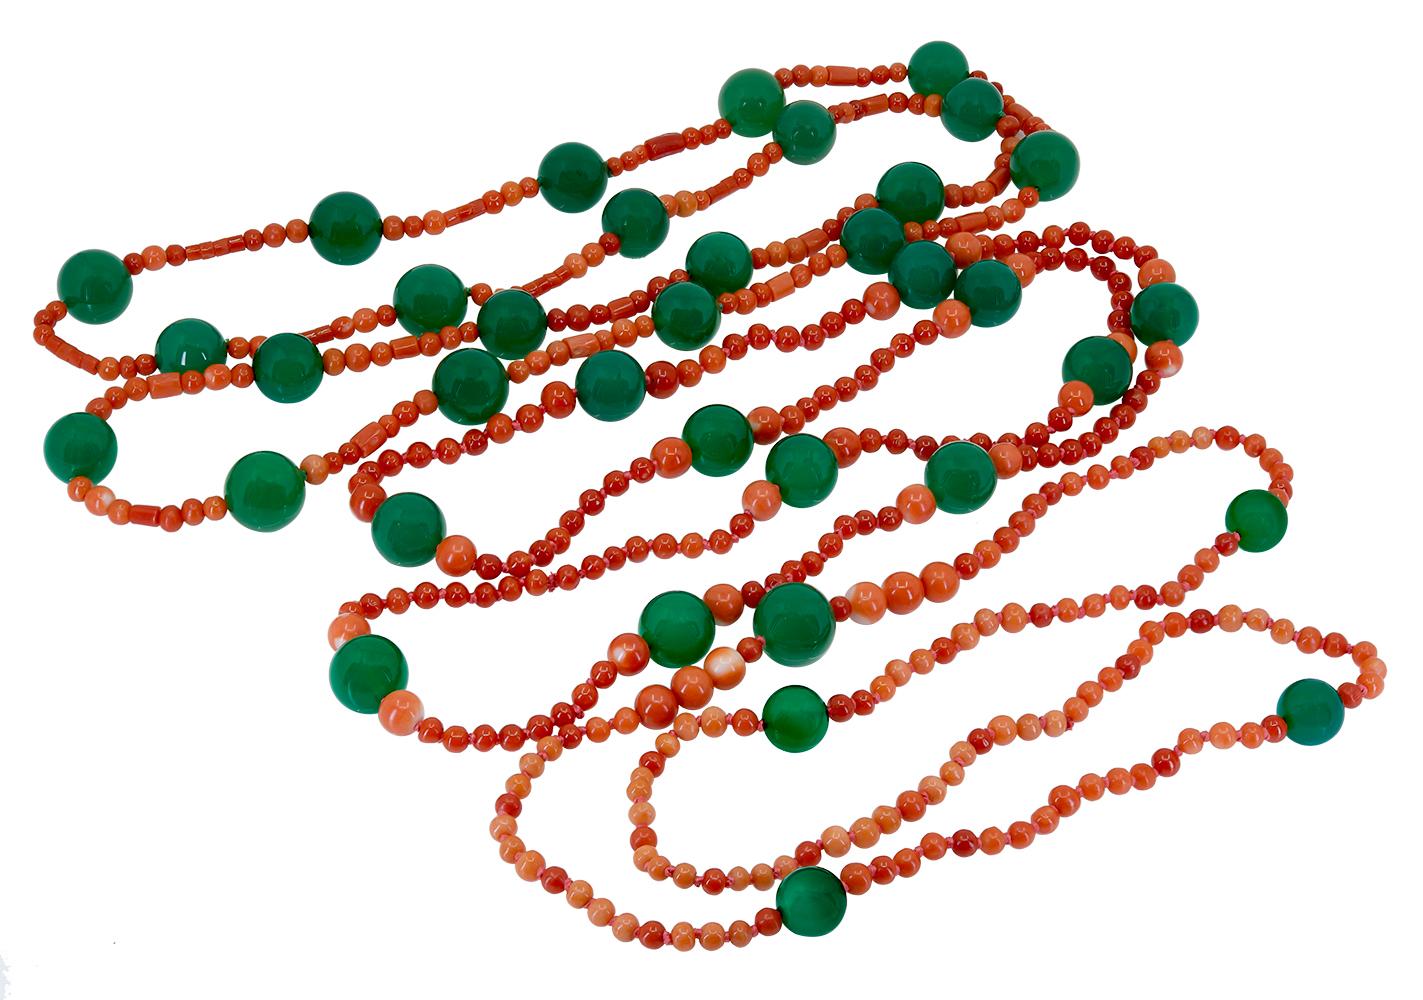 A Three Strand Red Coral and Green Onyx Necklace, measuring 24 inches, 26 inches and 30 inches. Each strand is comprised of Natural, untreated Red Coral and Green Onyx Beads. The bright, lustrous, Green Onyx beads range in size from 10-13 mm each,